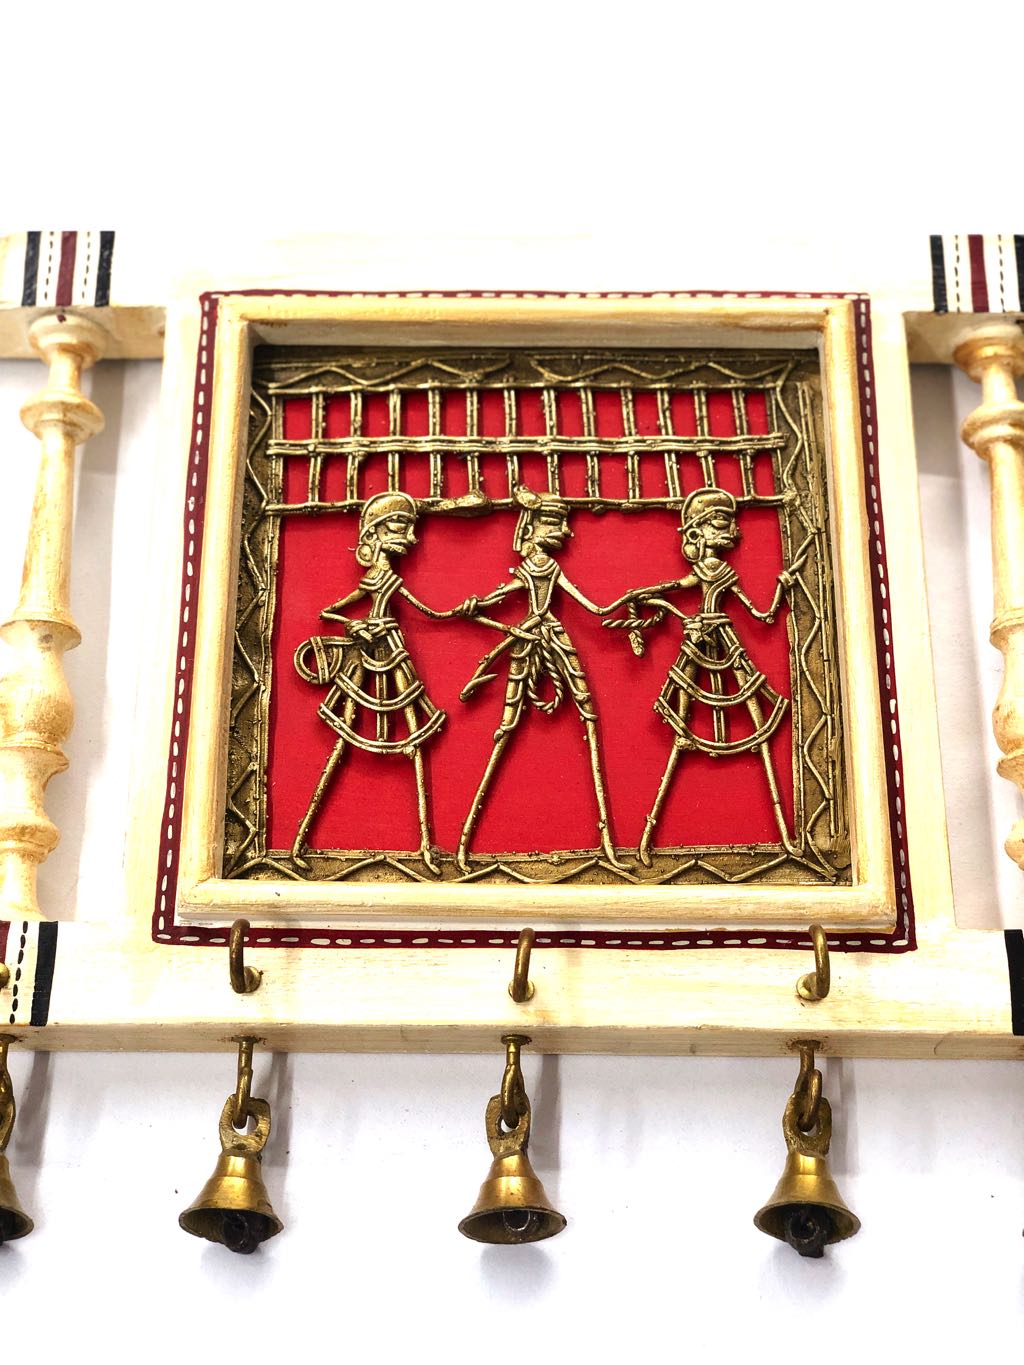 Home Utility For Your Set Of Keys In Indian Art Depiction Décor By Tamrapatra